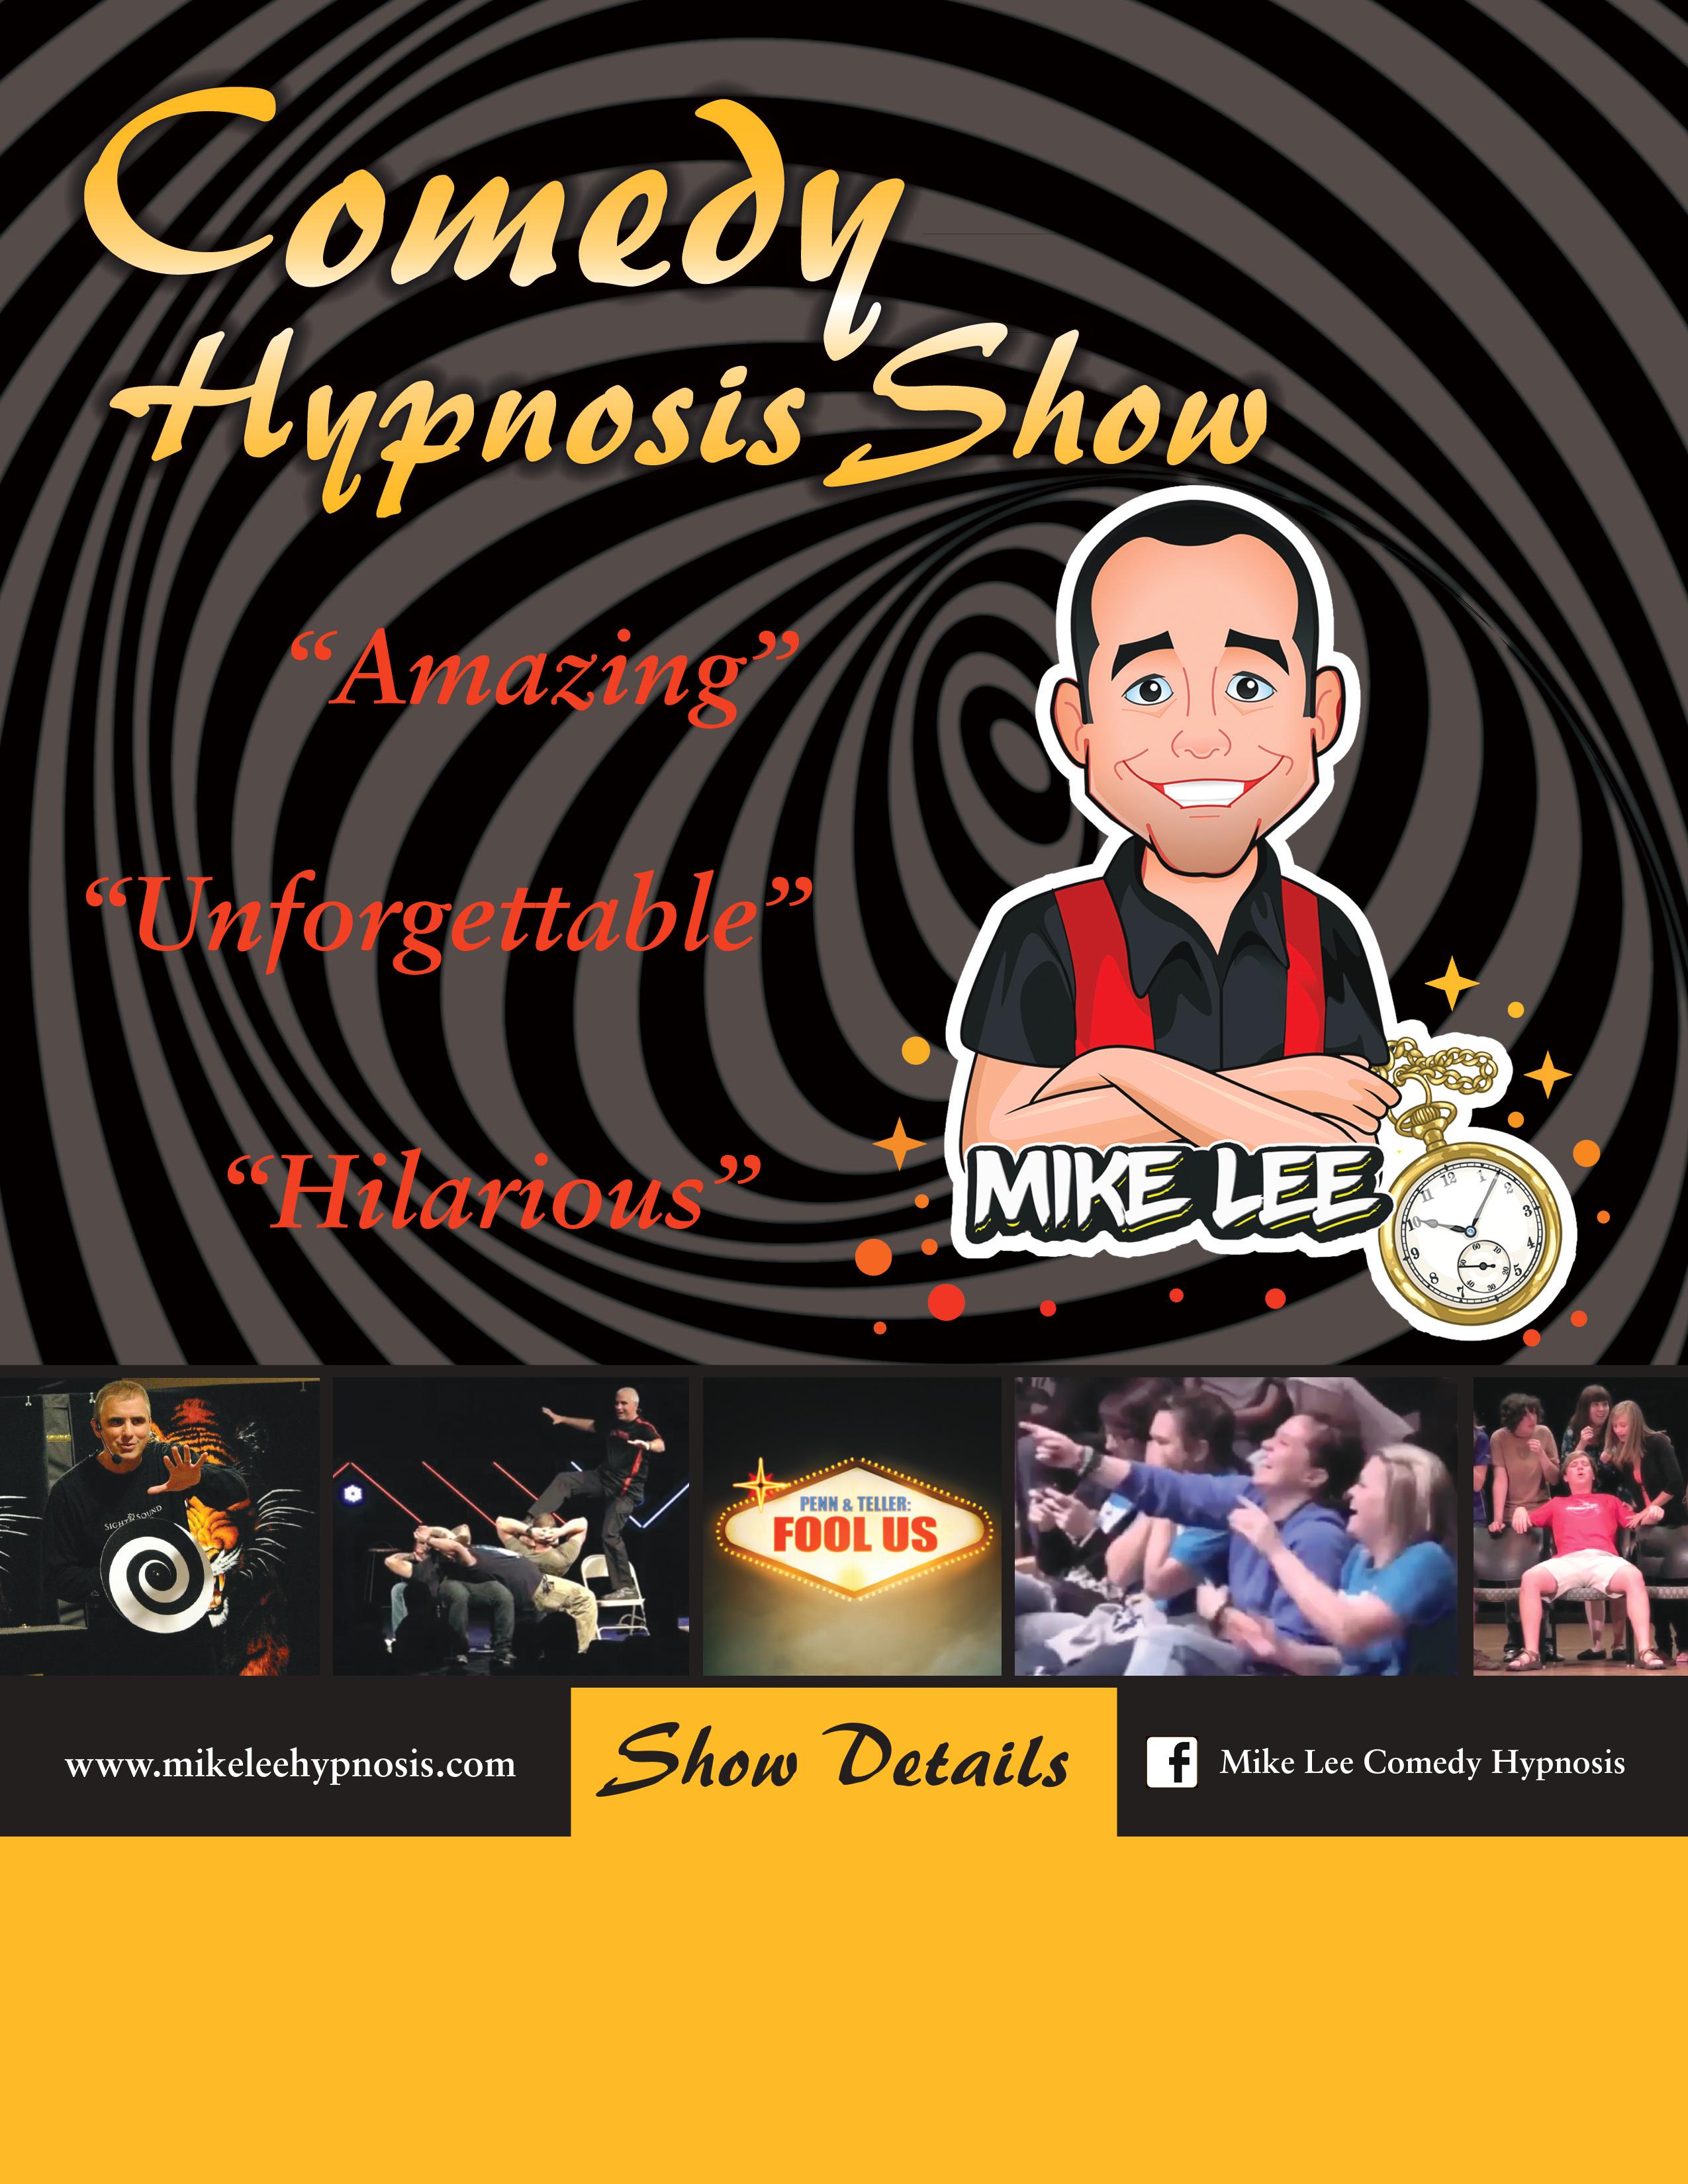 Mike Lee's Comedy Hypnosis